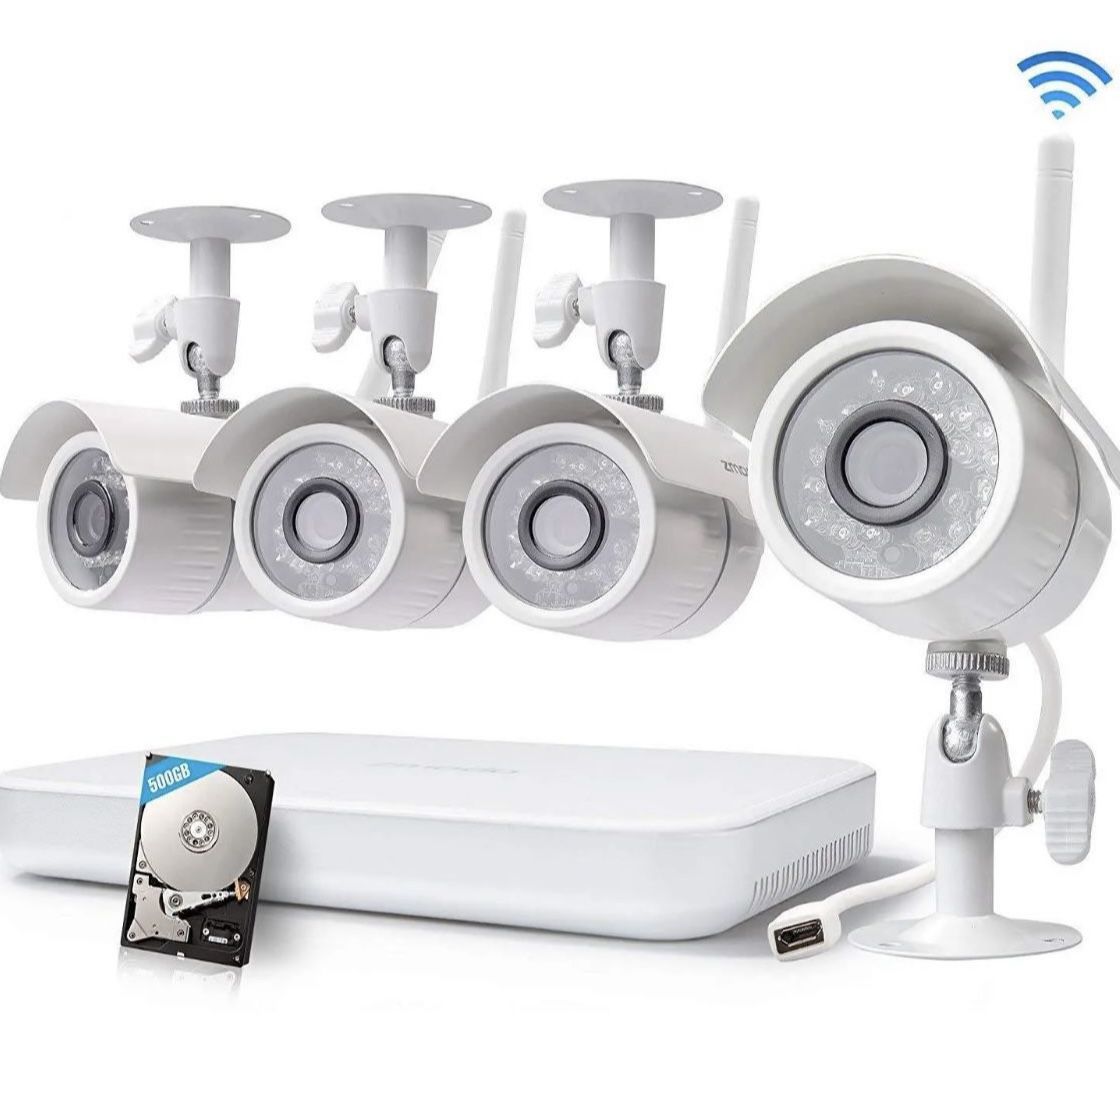 New Wireless Home Security Cameras System - 1080p 8CH HDMI NVR